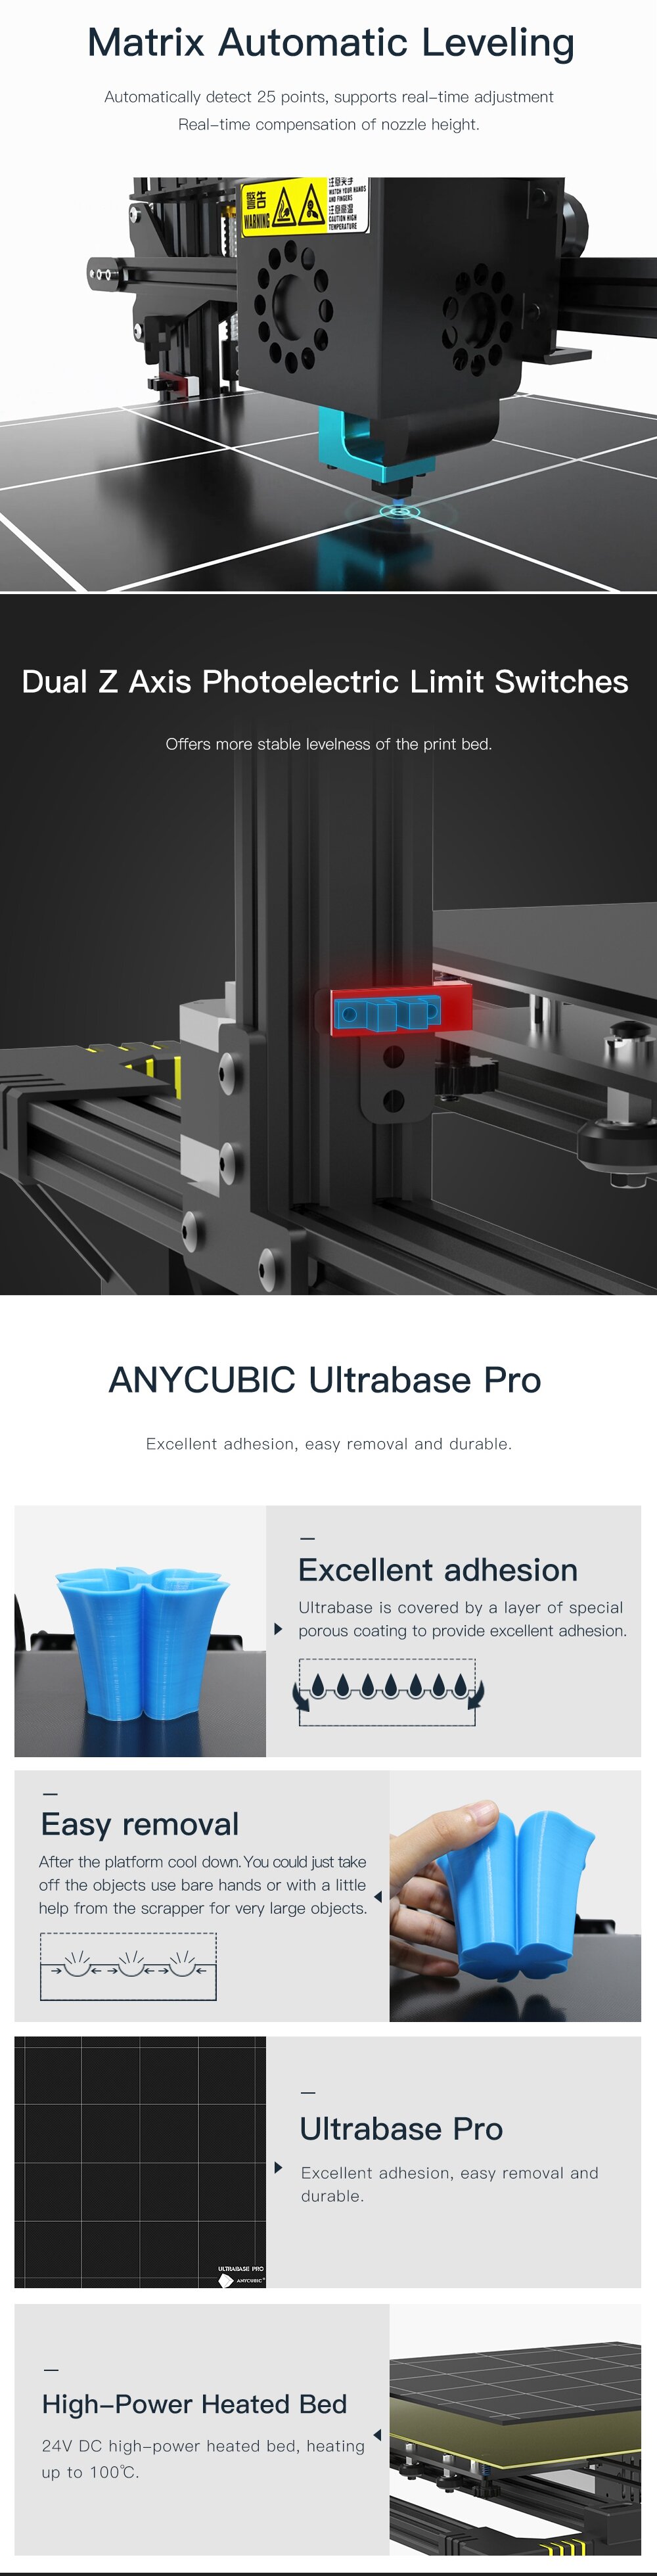 Anycubic Chiron Large Format 3D Printer